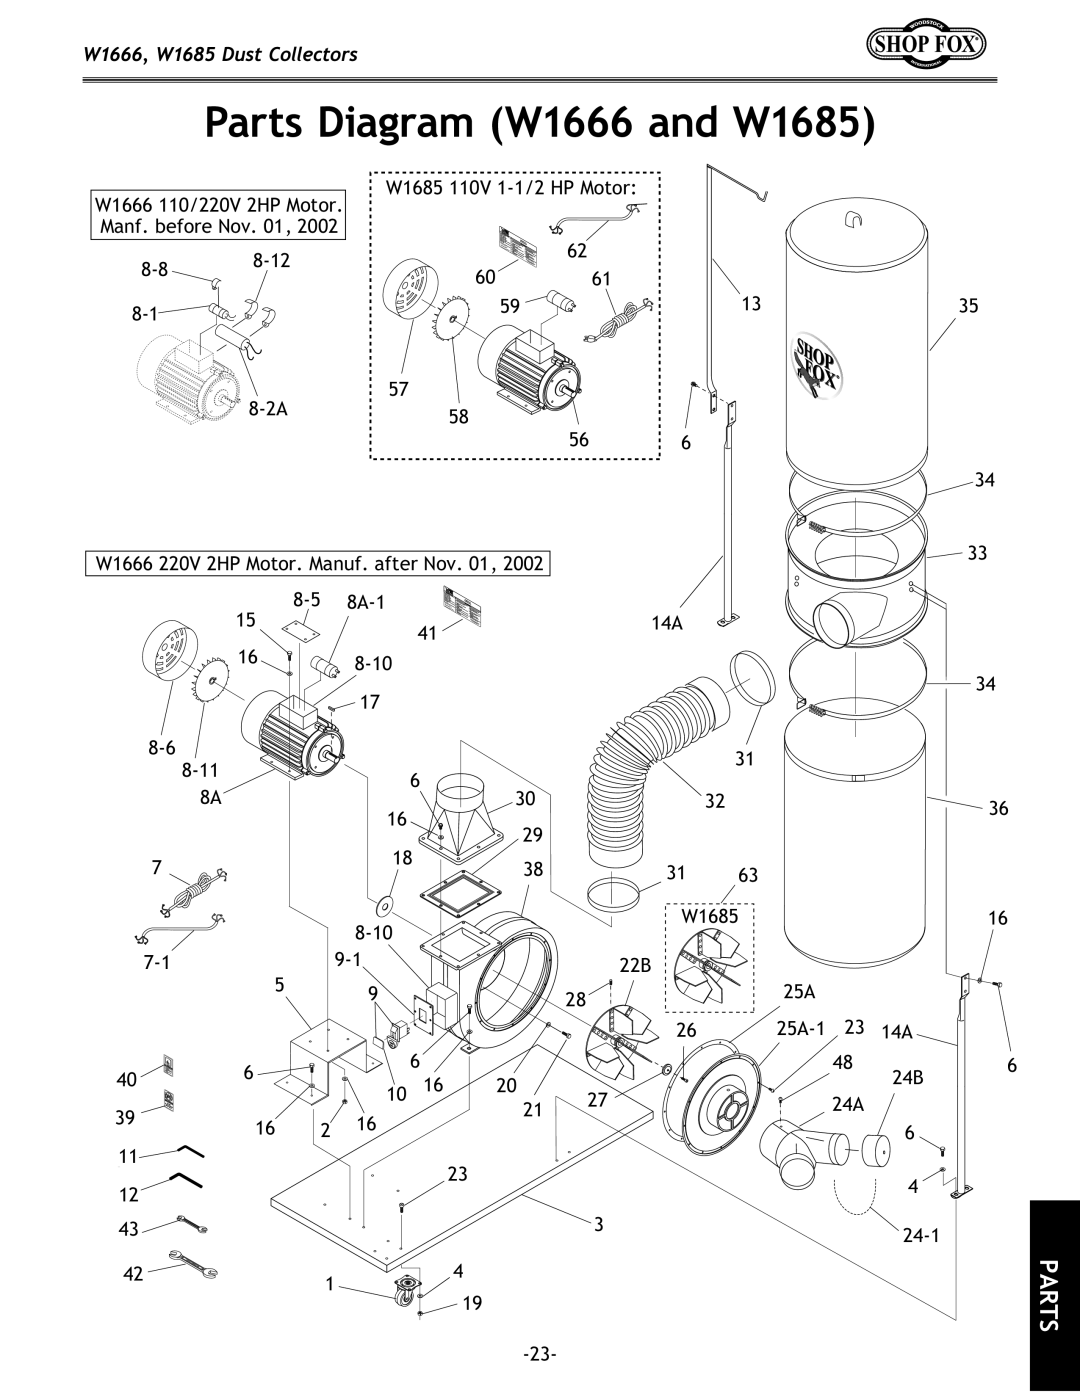 Woodstock DUST COLLECTORS instruction manual W1666, W1685 Dust Collectors, Parts Diagram W1666 and W1685 